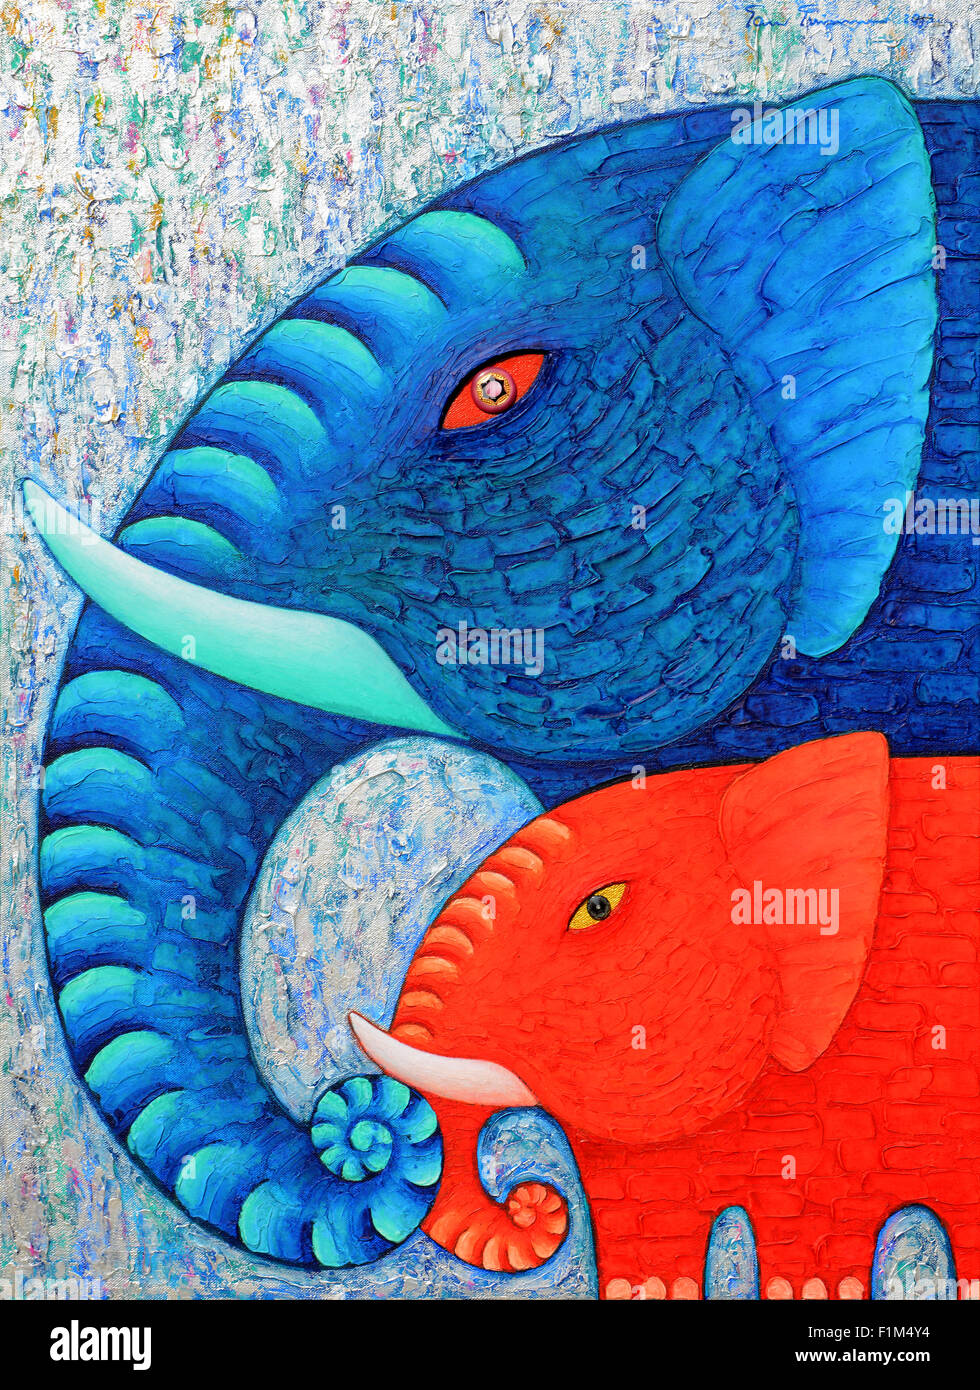 Red and Blue Elephant 2, Original acrylic painting on canvas. Stock Photo